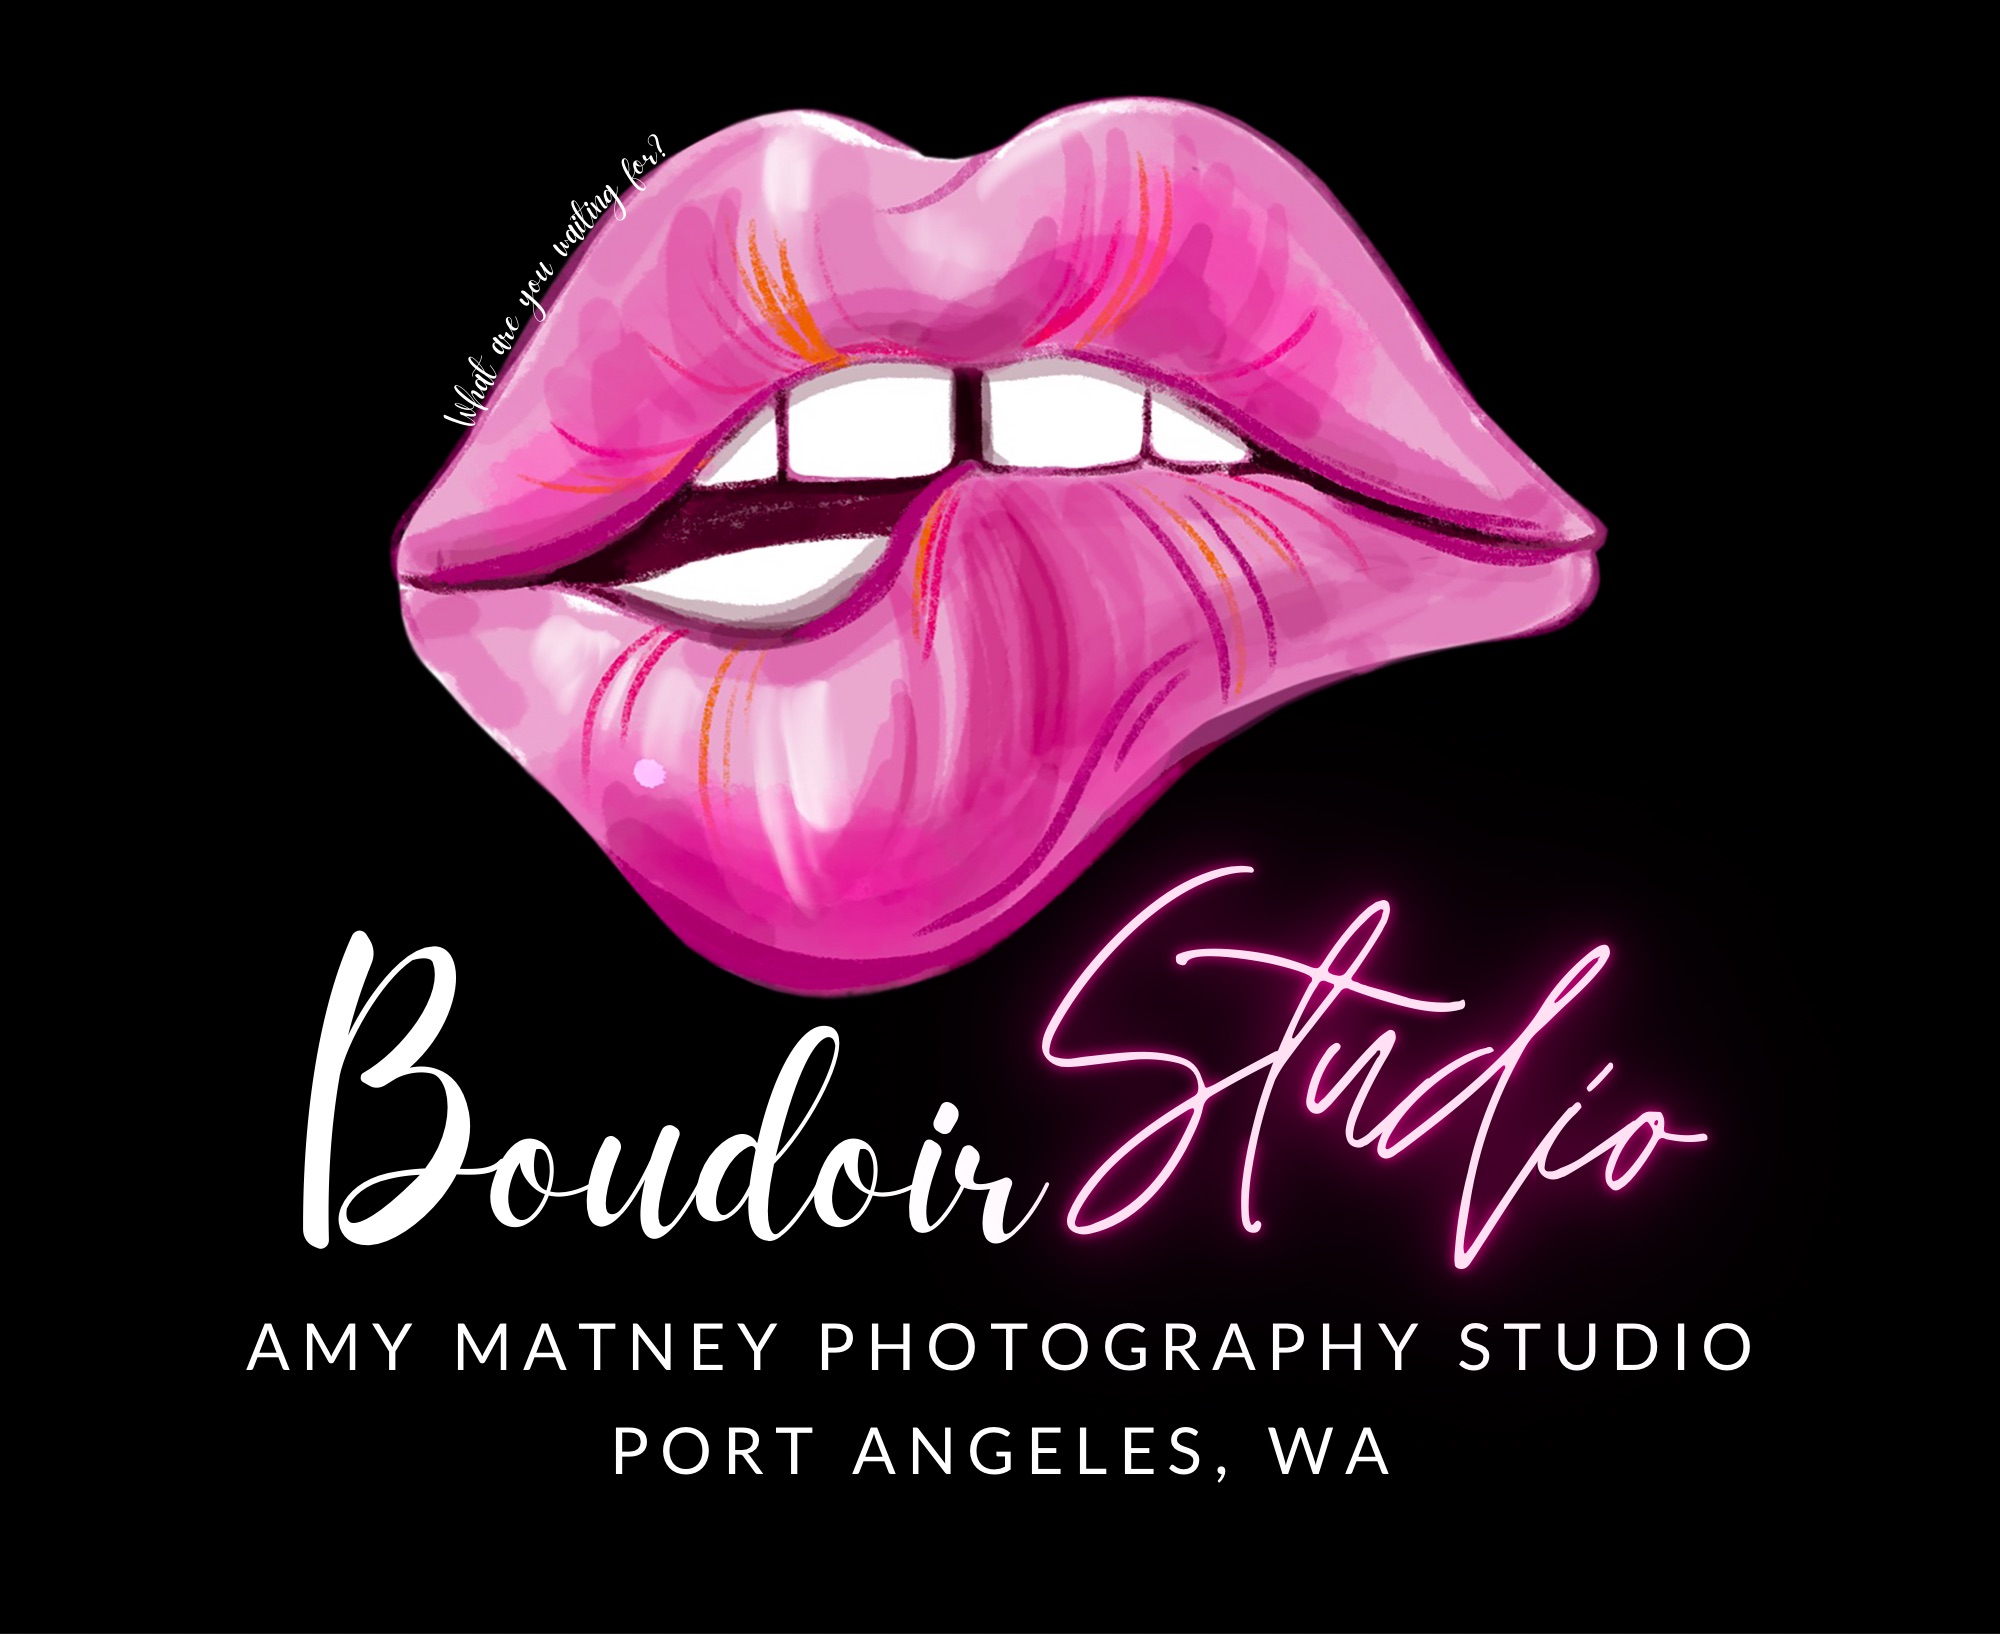 Logo comprised of an illustration of pink lips and words Boudoir Studio Amy Matney Photography Studio Port Angeles, WA